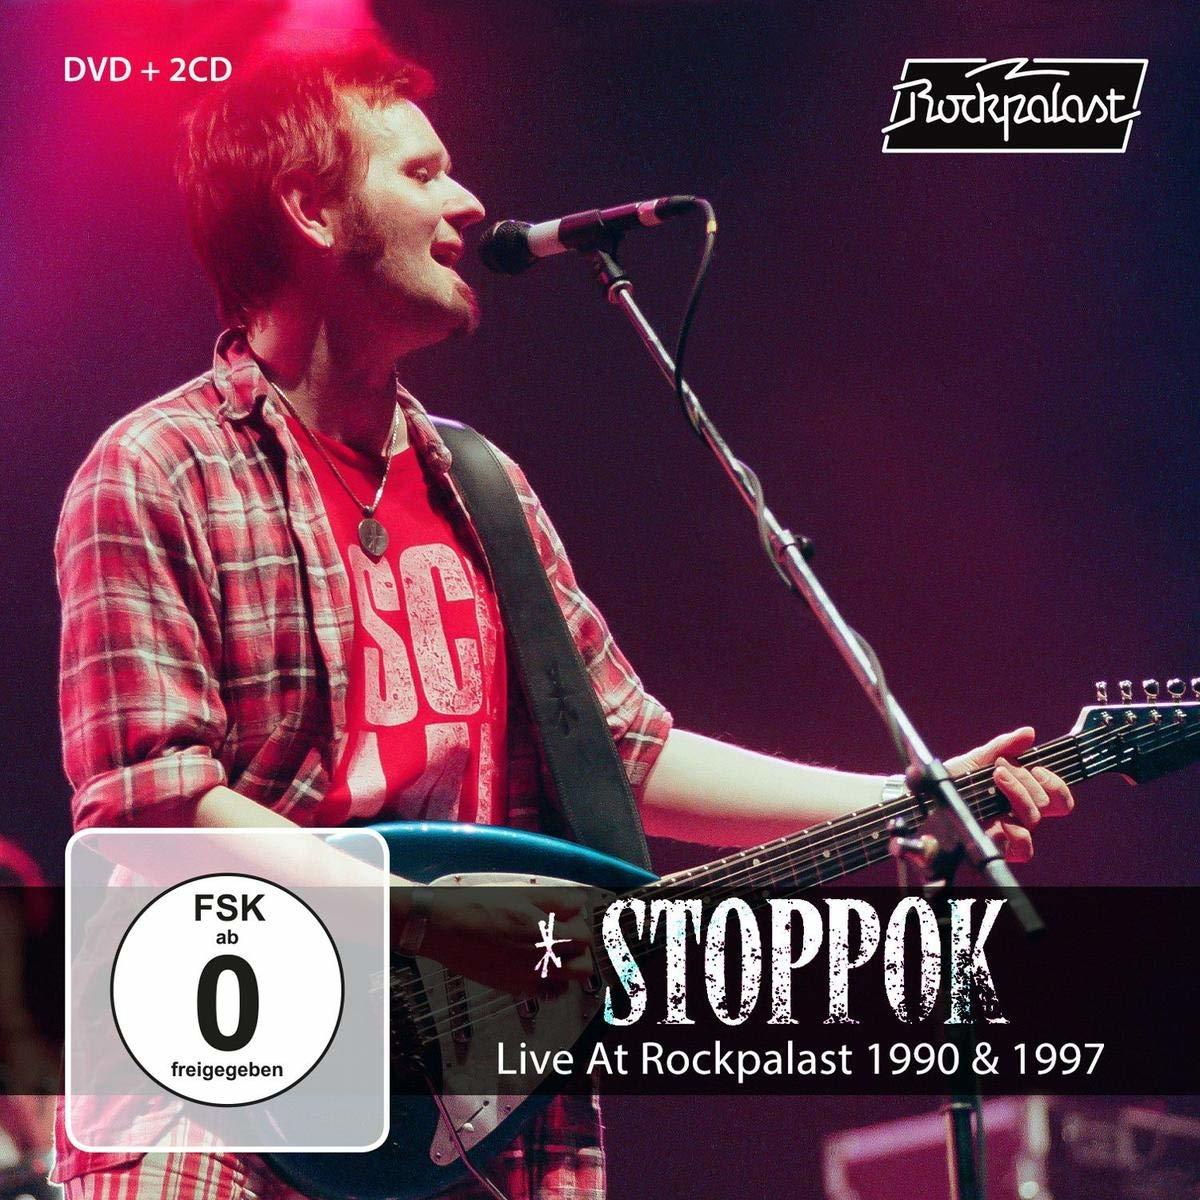 (2CD,DVD) STOPPOK (CD 1997 + At 1990 & DVD Rockpalast - Video) - Live